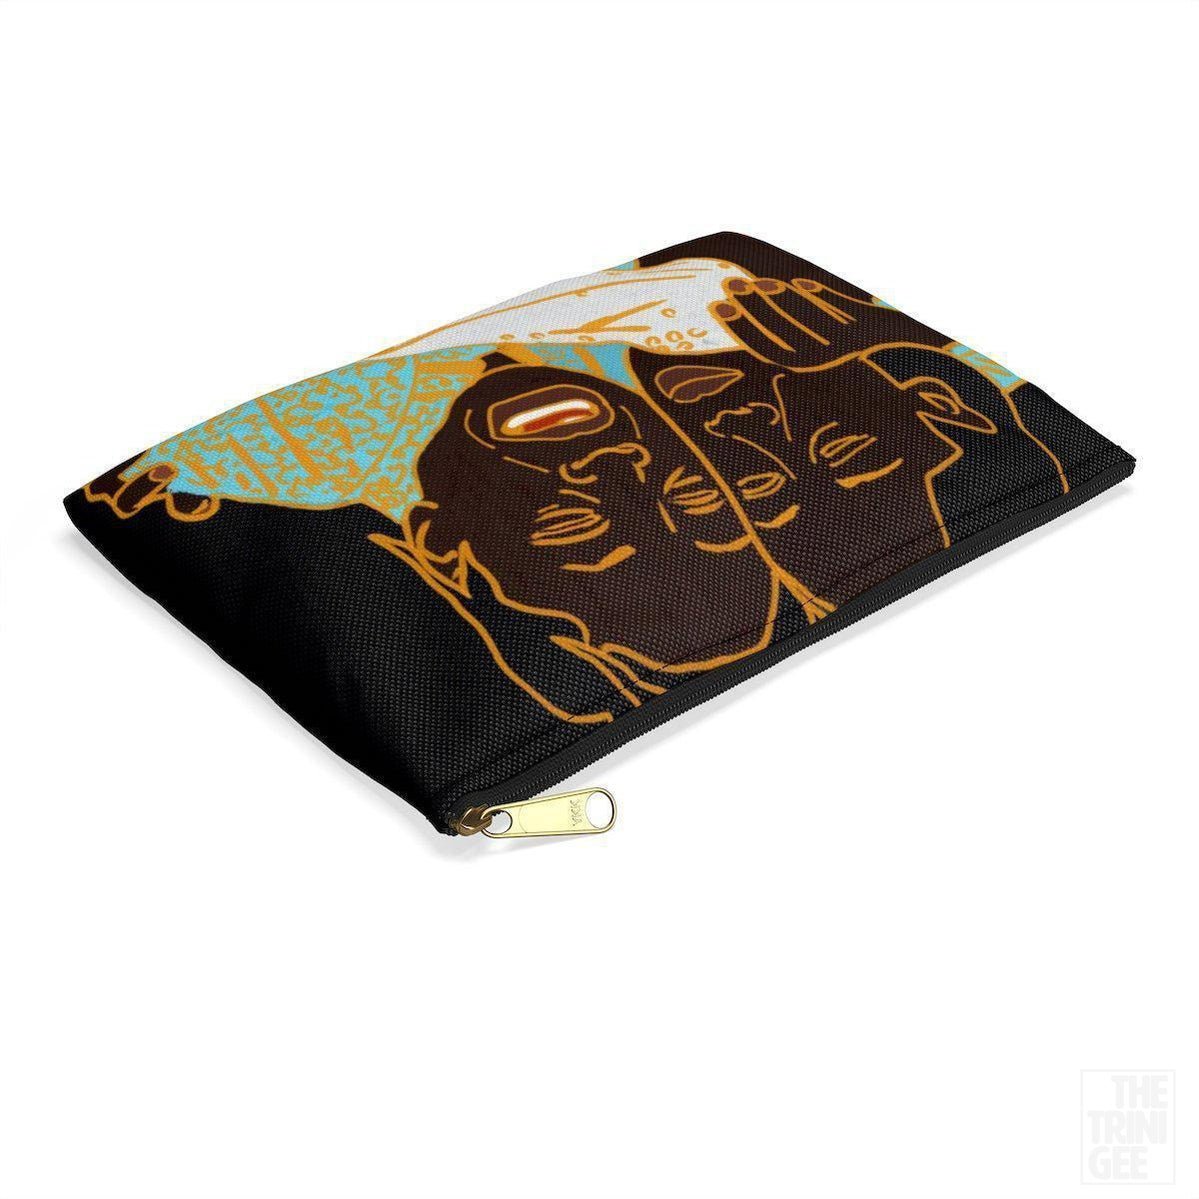 Cellie & Nettie Pouch - The Trini Gee